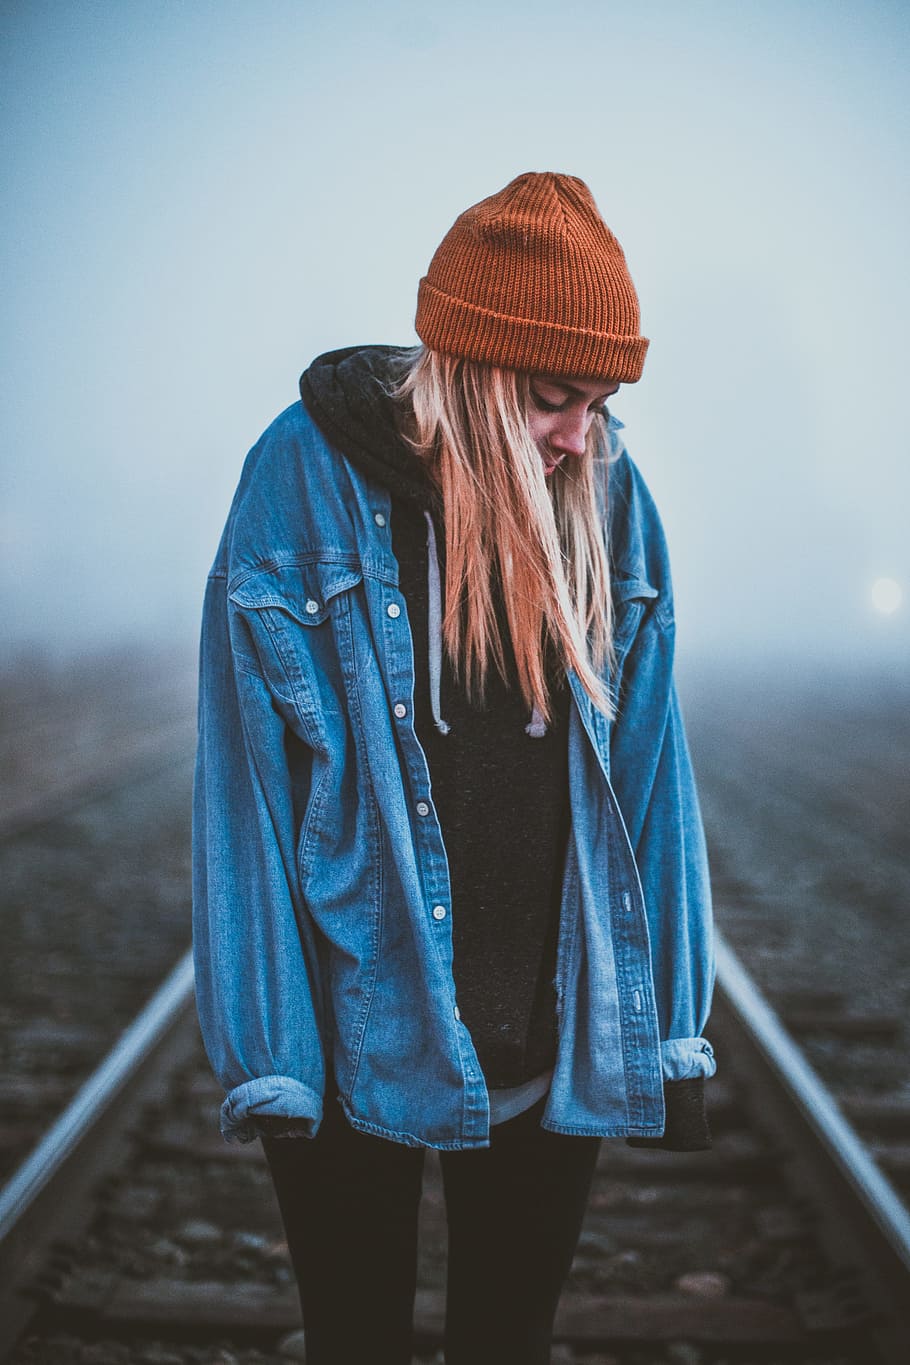 cold, weather, foggy, fog, moody, mood, girl, blonde, woman, standing